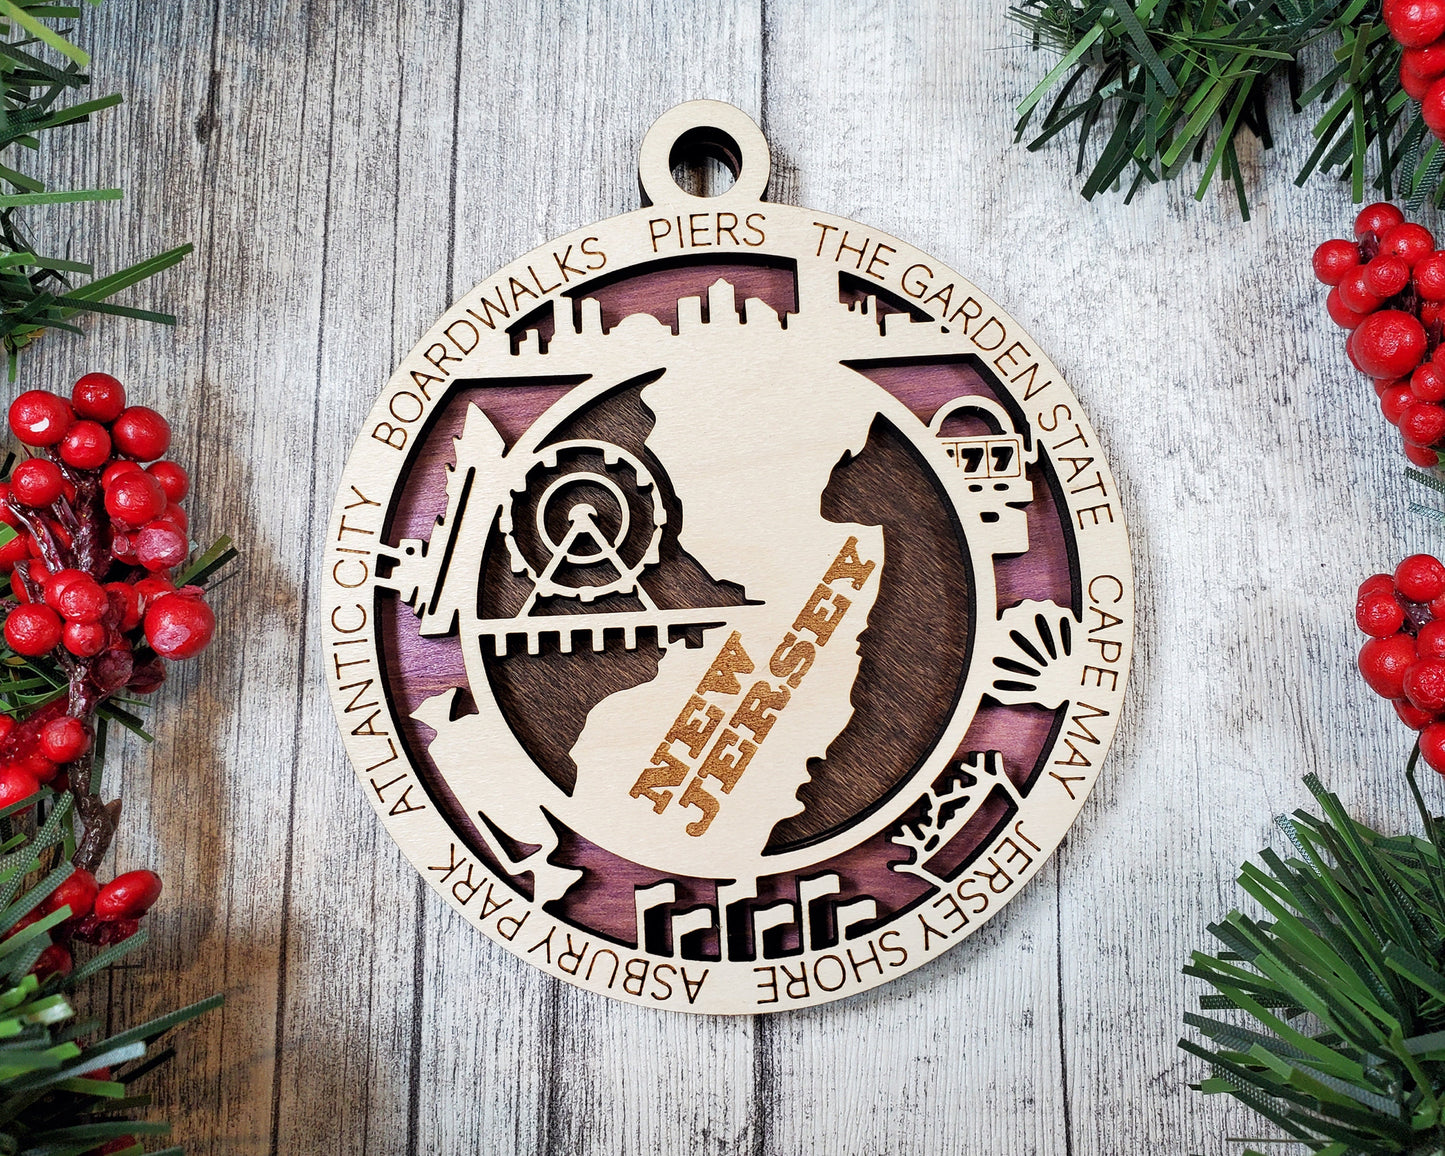 New Jersey State Ornament - SVG File Download - Sized for Glowforge - Laser Ready Digital Files